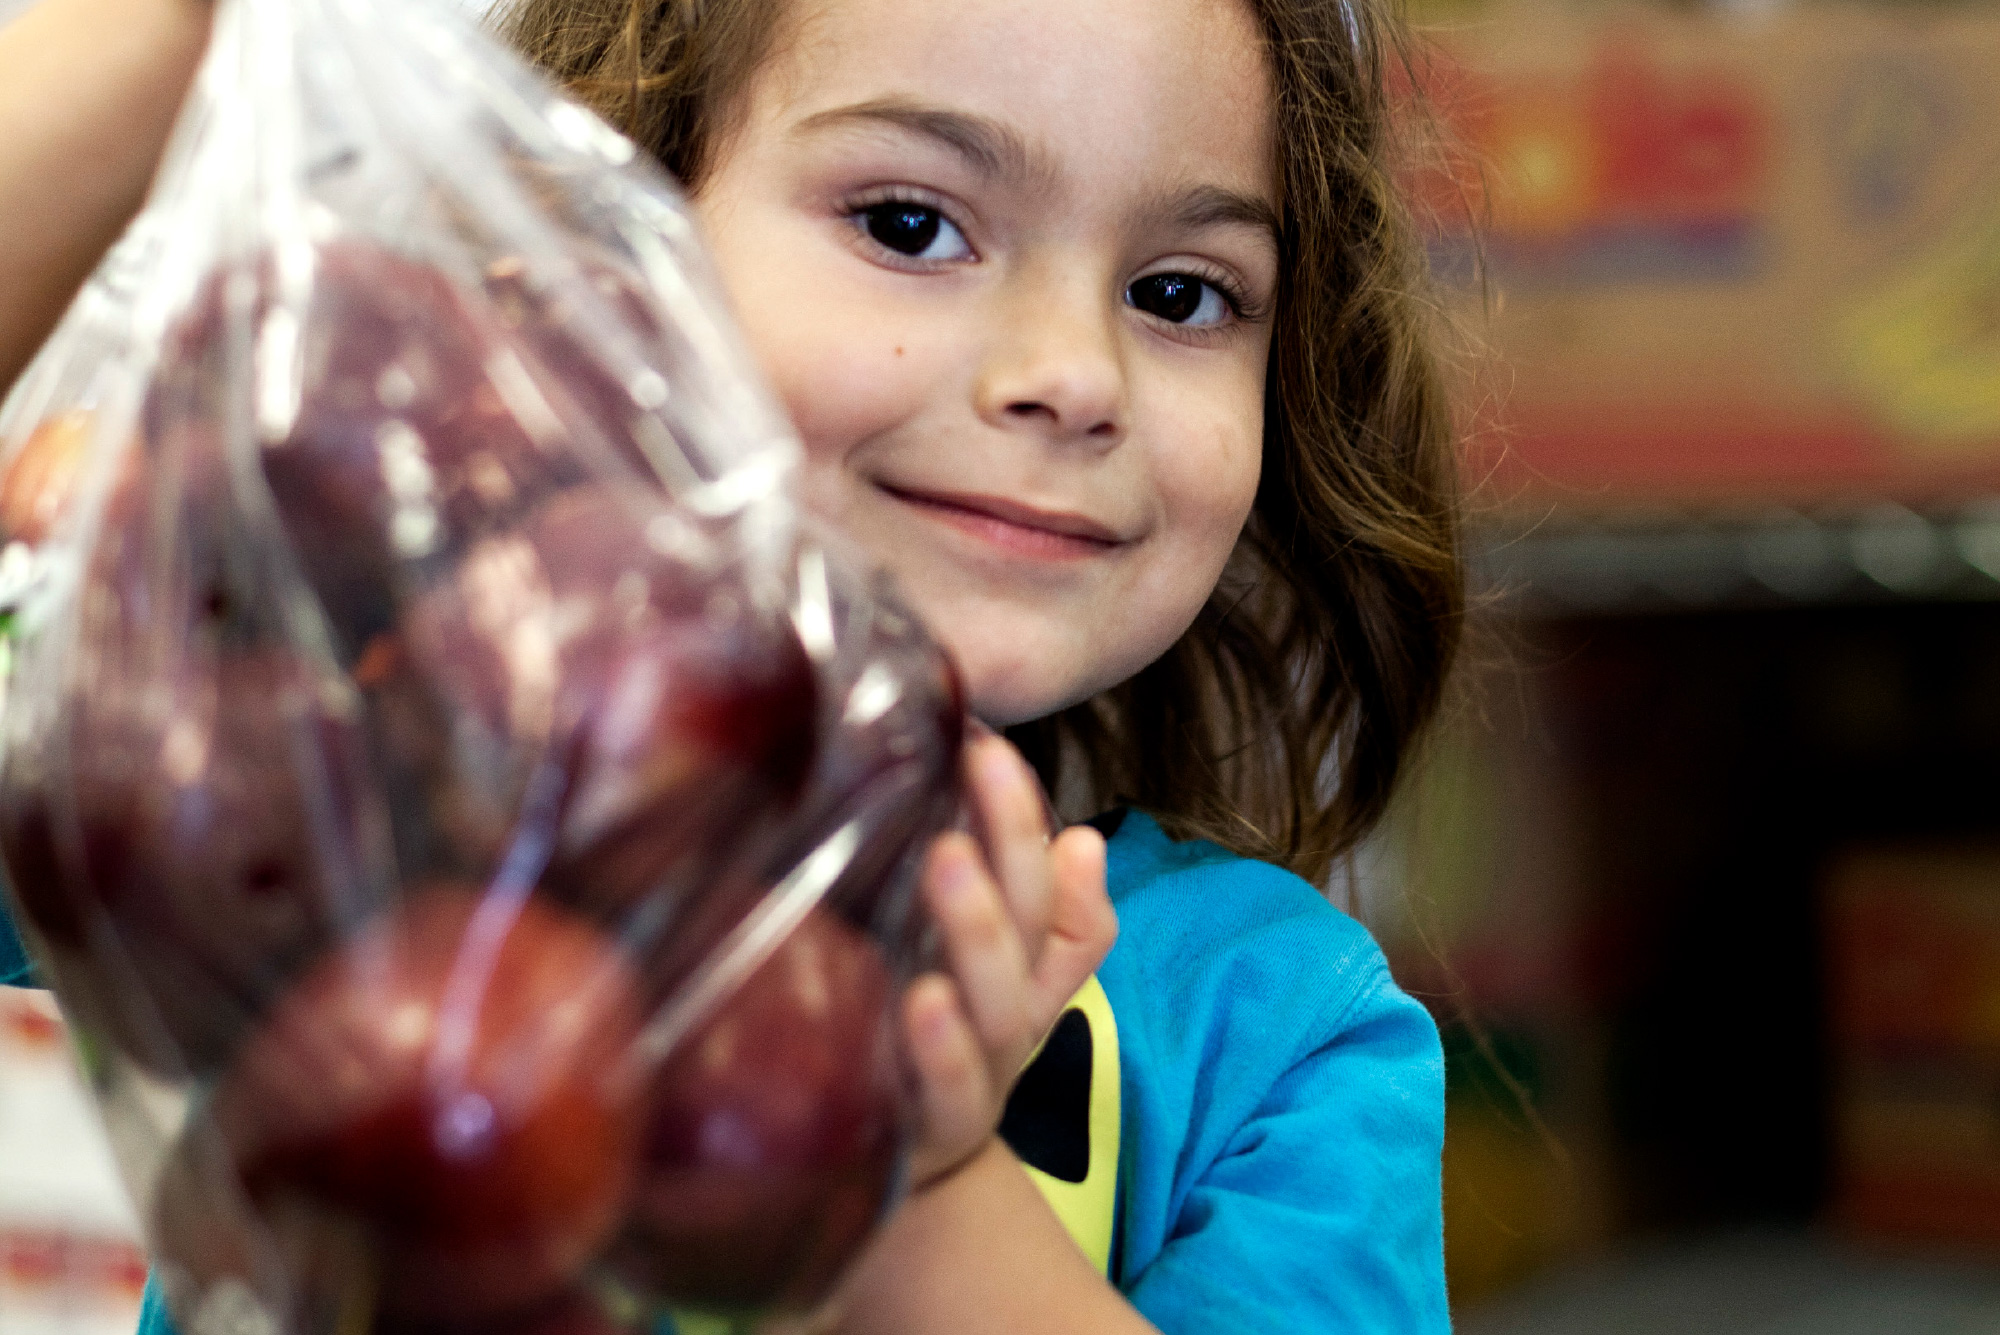 A young girl holds a bag of apples.